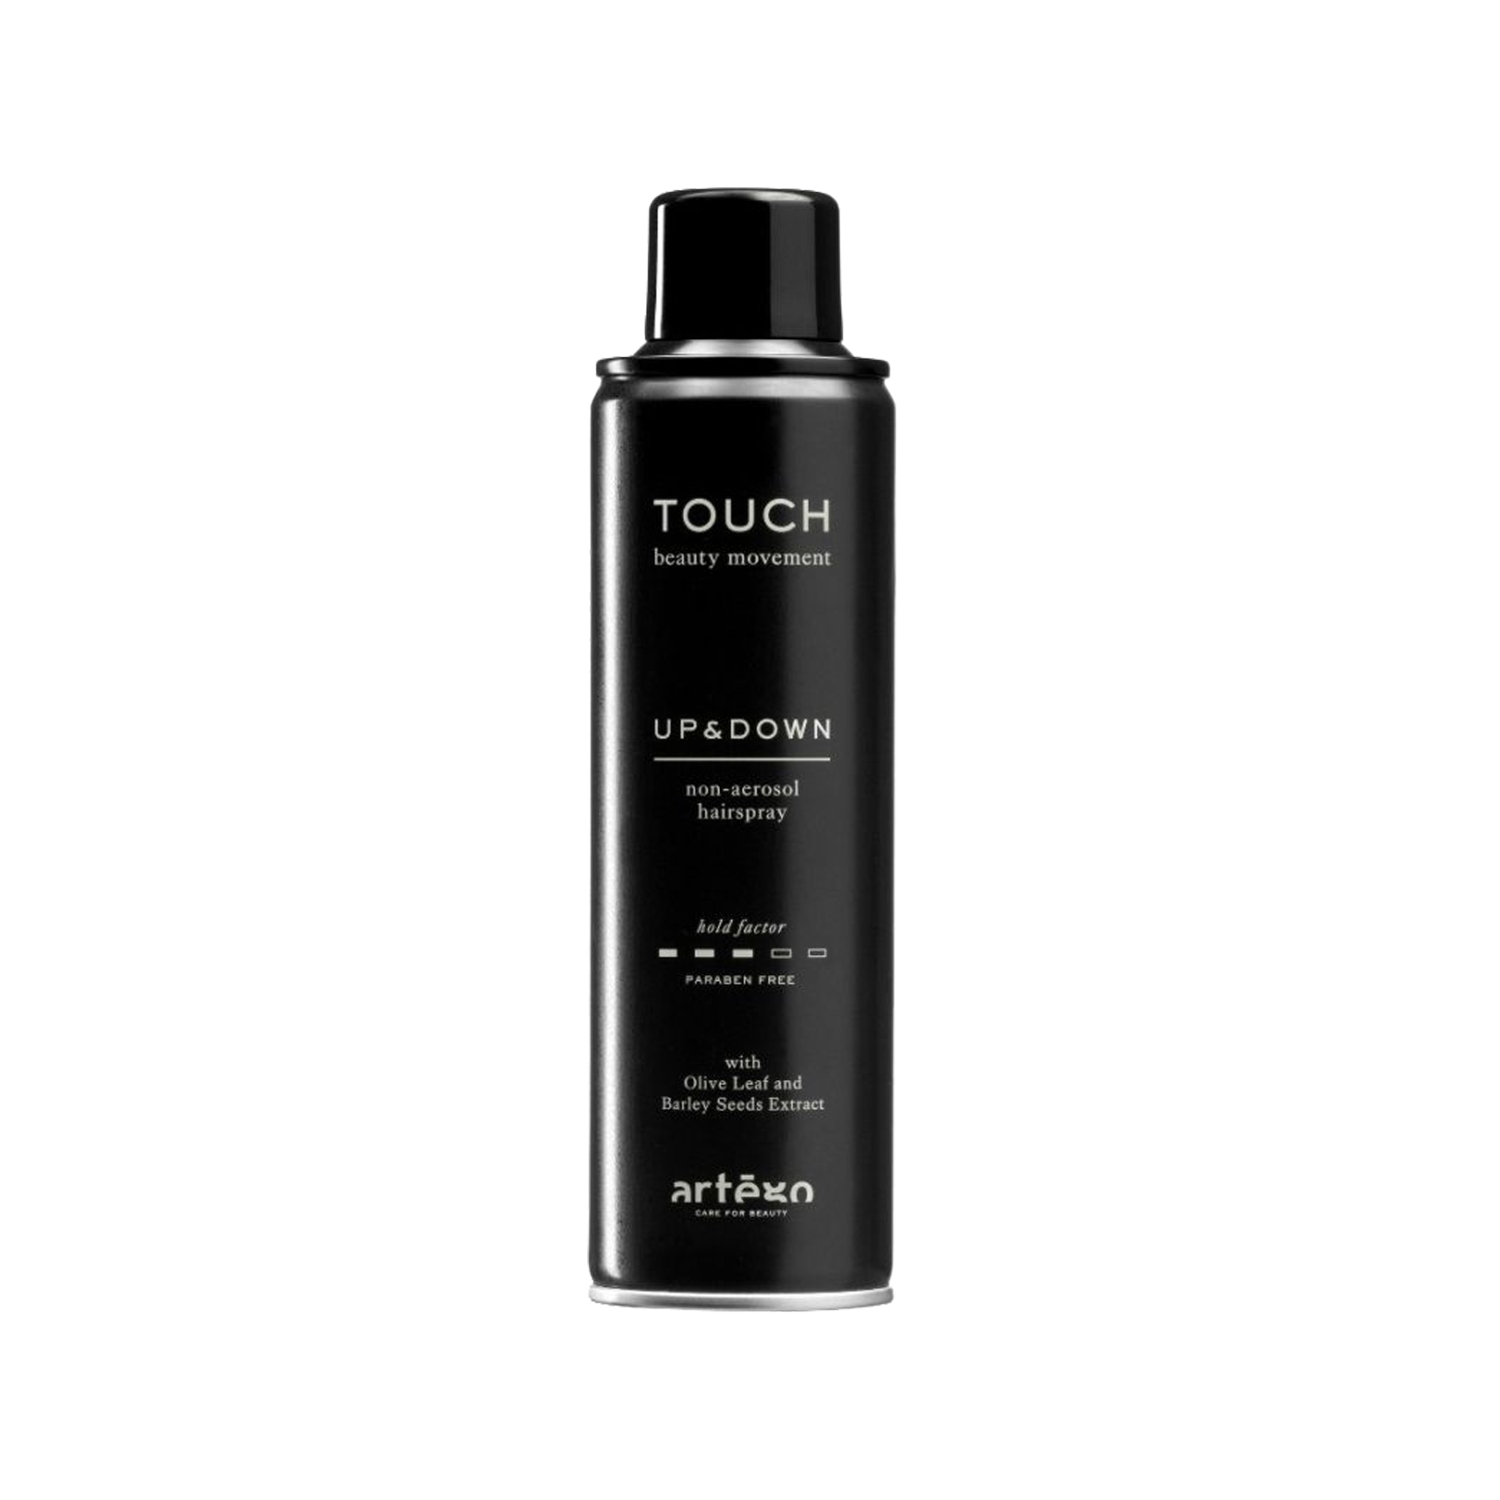 Artego Touch Up And Down Non Aerosol Hairspray 400ml